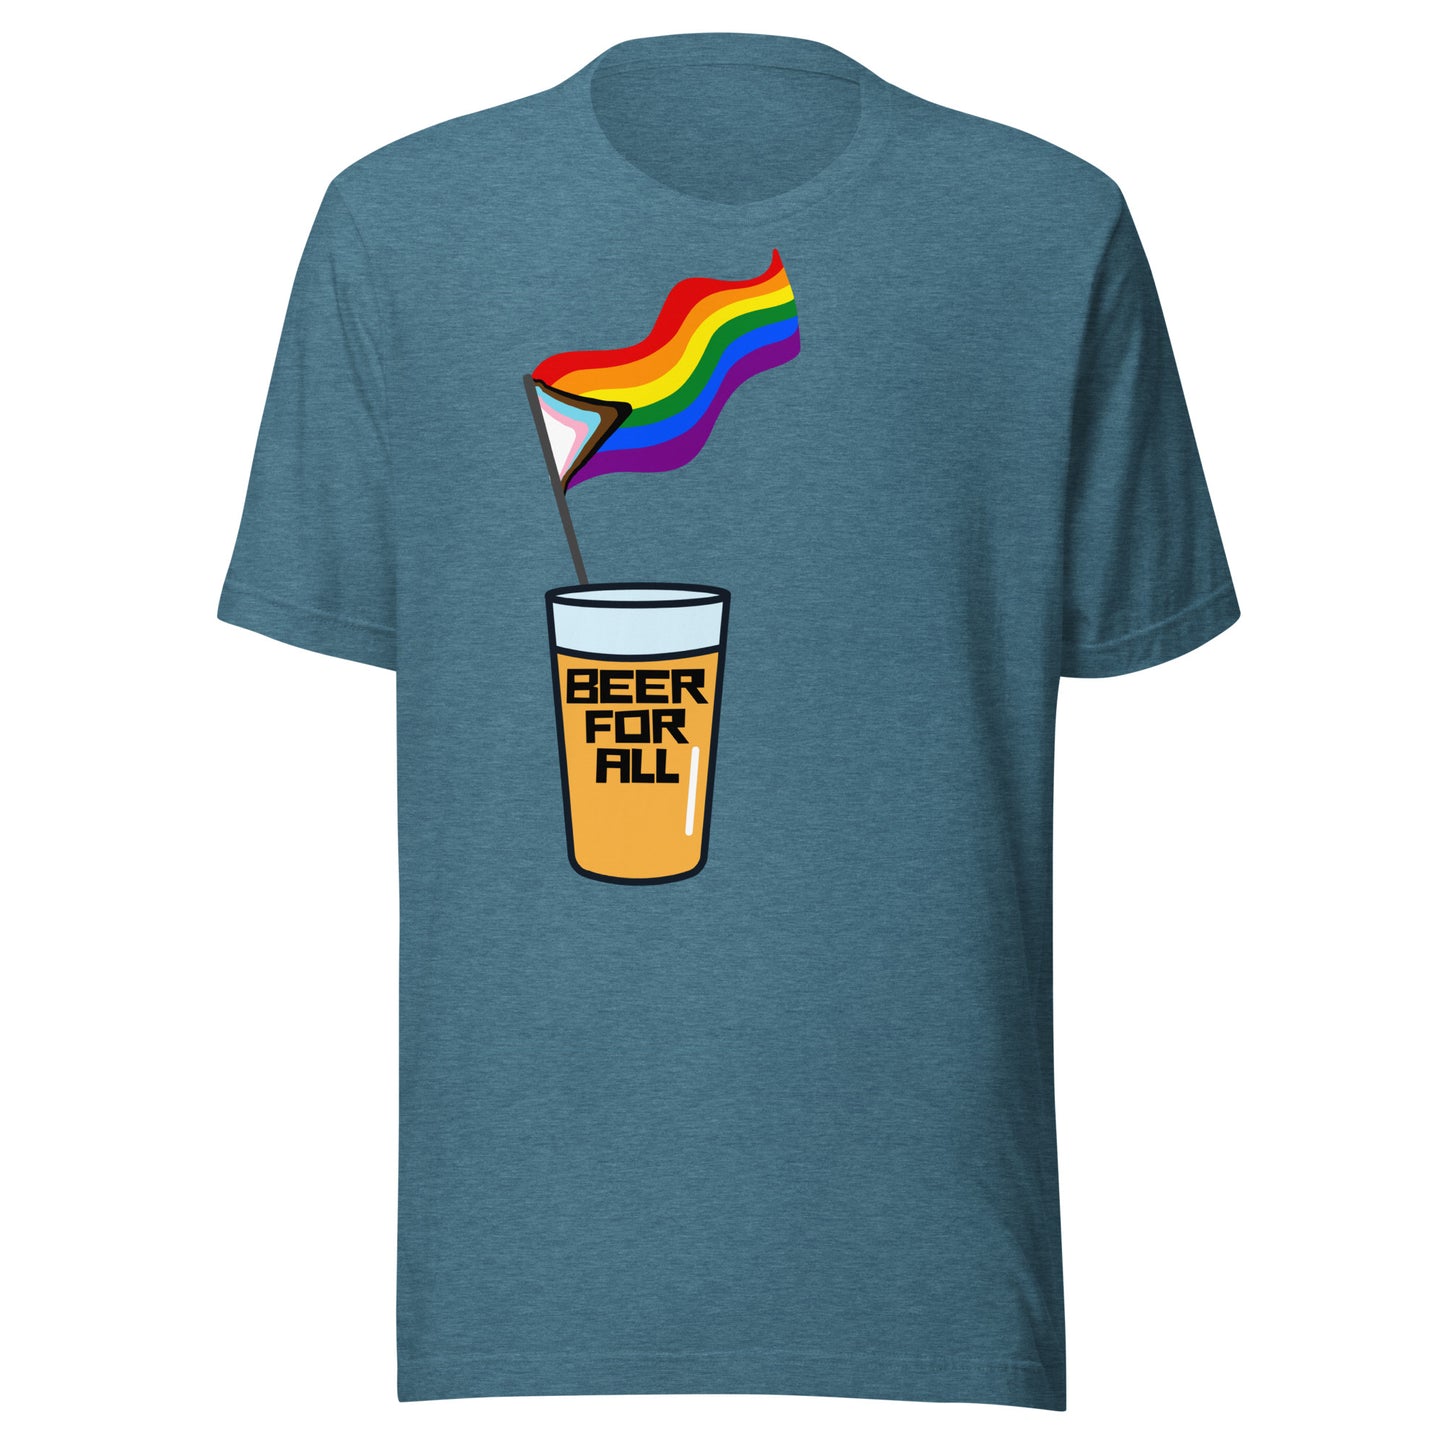 Beer For All Uni-sexy soft style tee